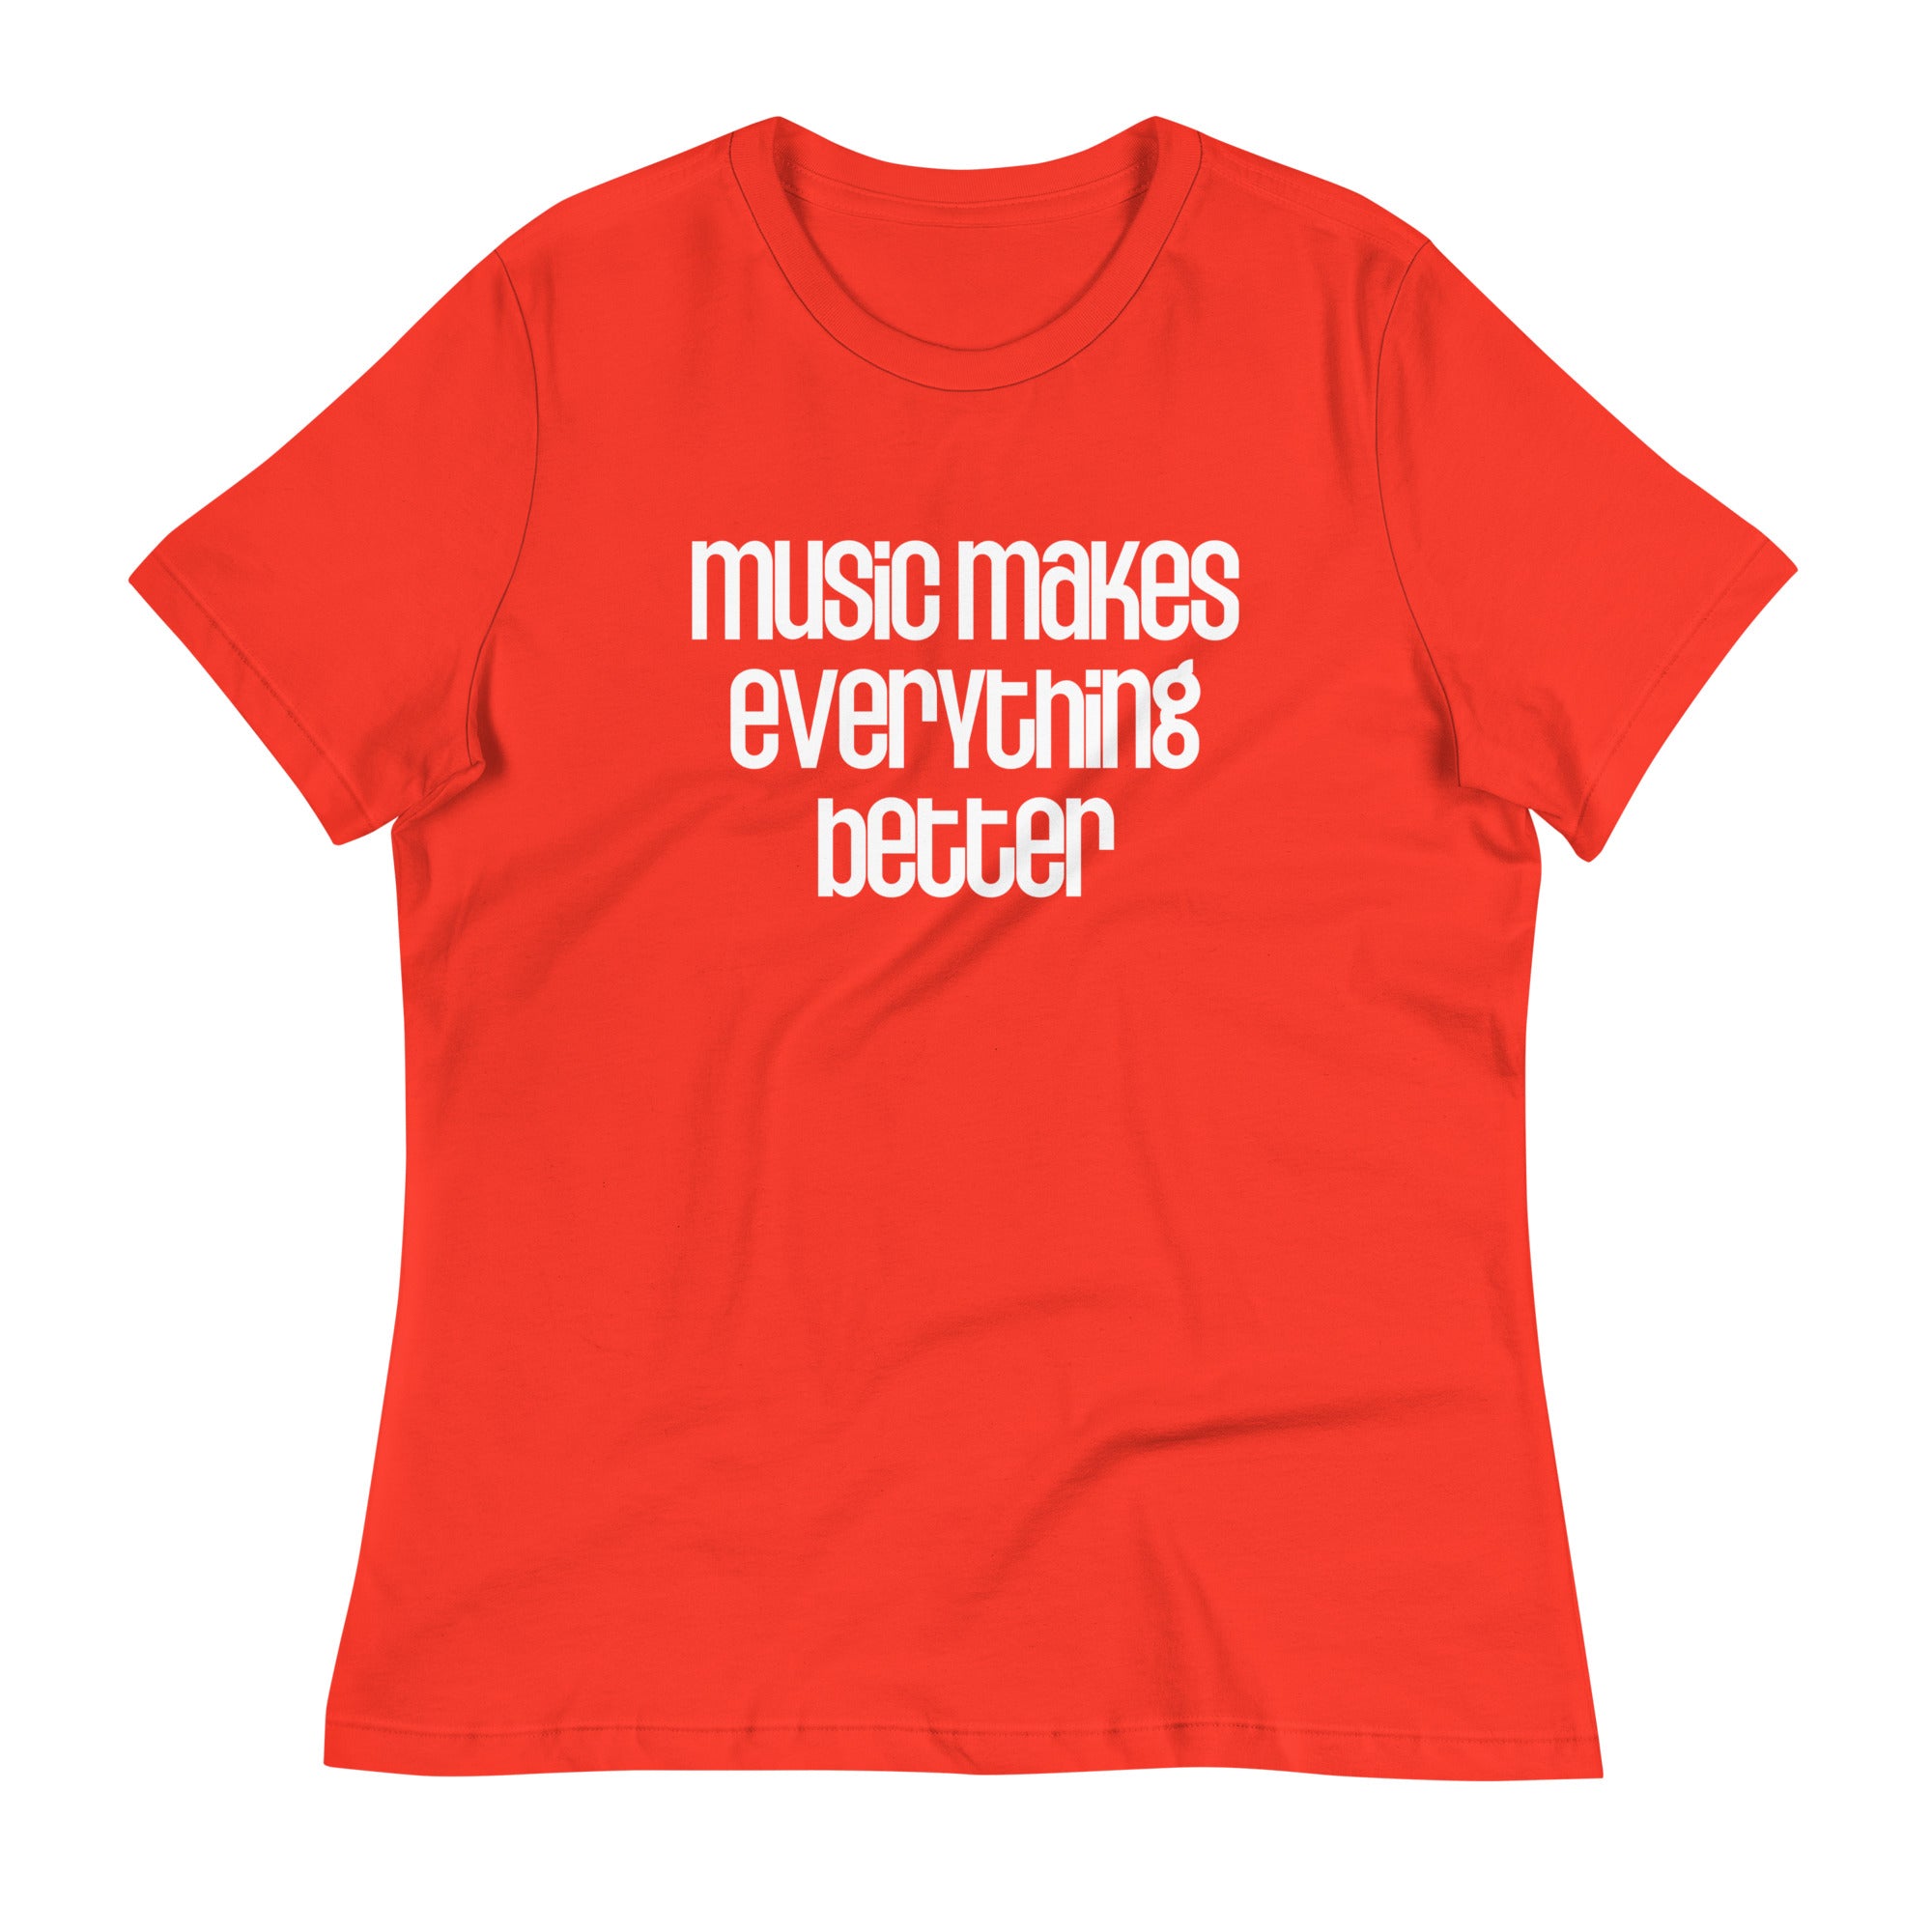 Music Makes Everything Better - Women's Fit T-Shirt